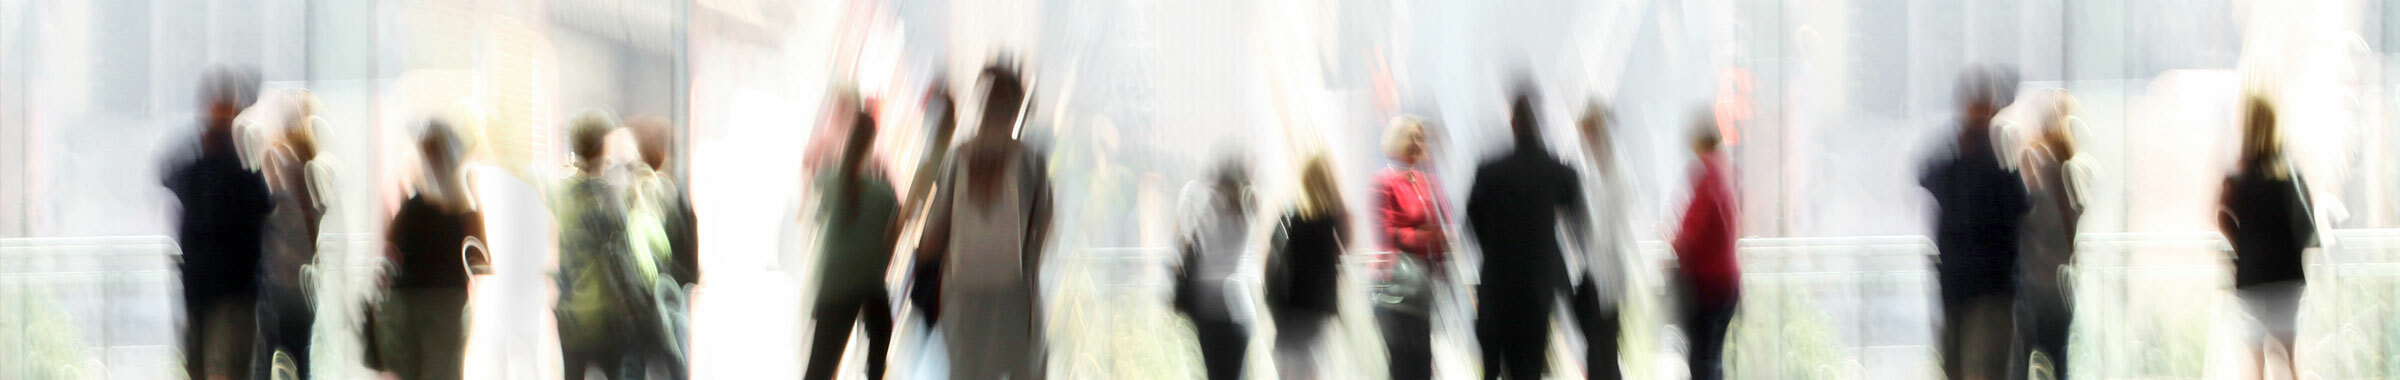 crowd of blurred people walking in an office lobby